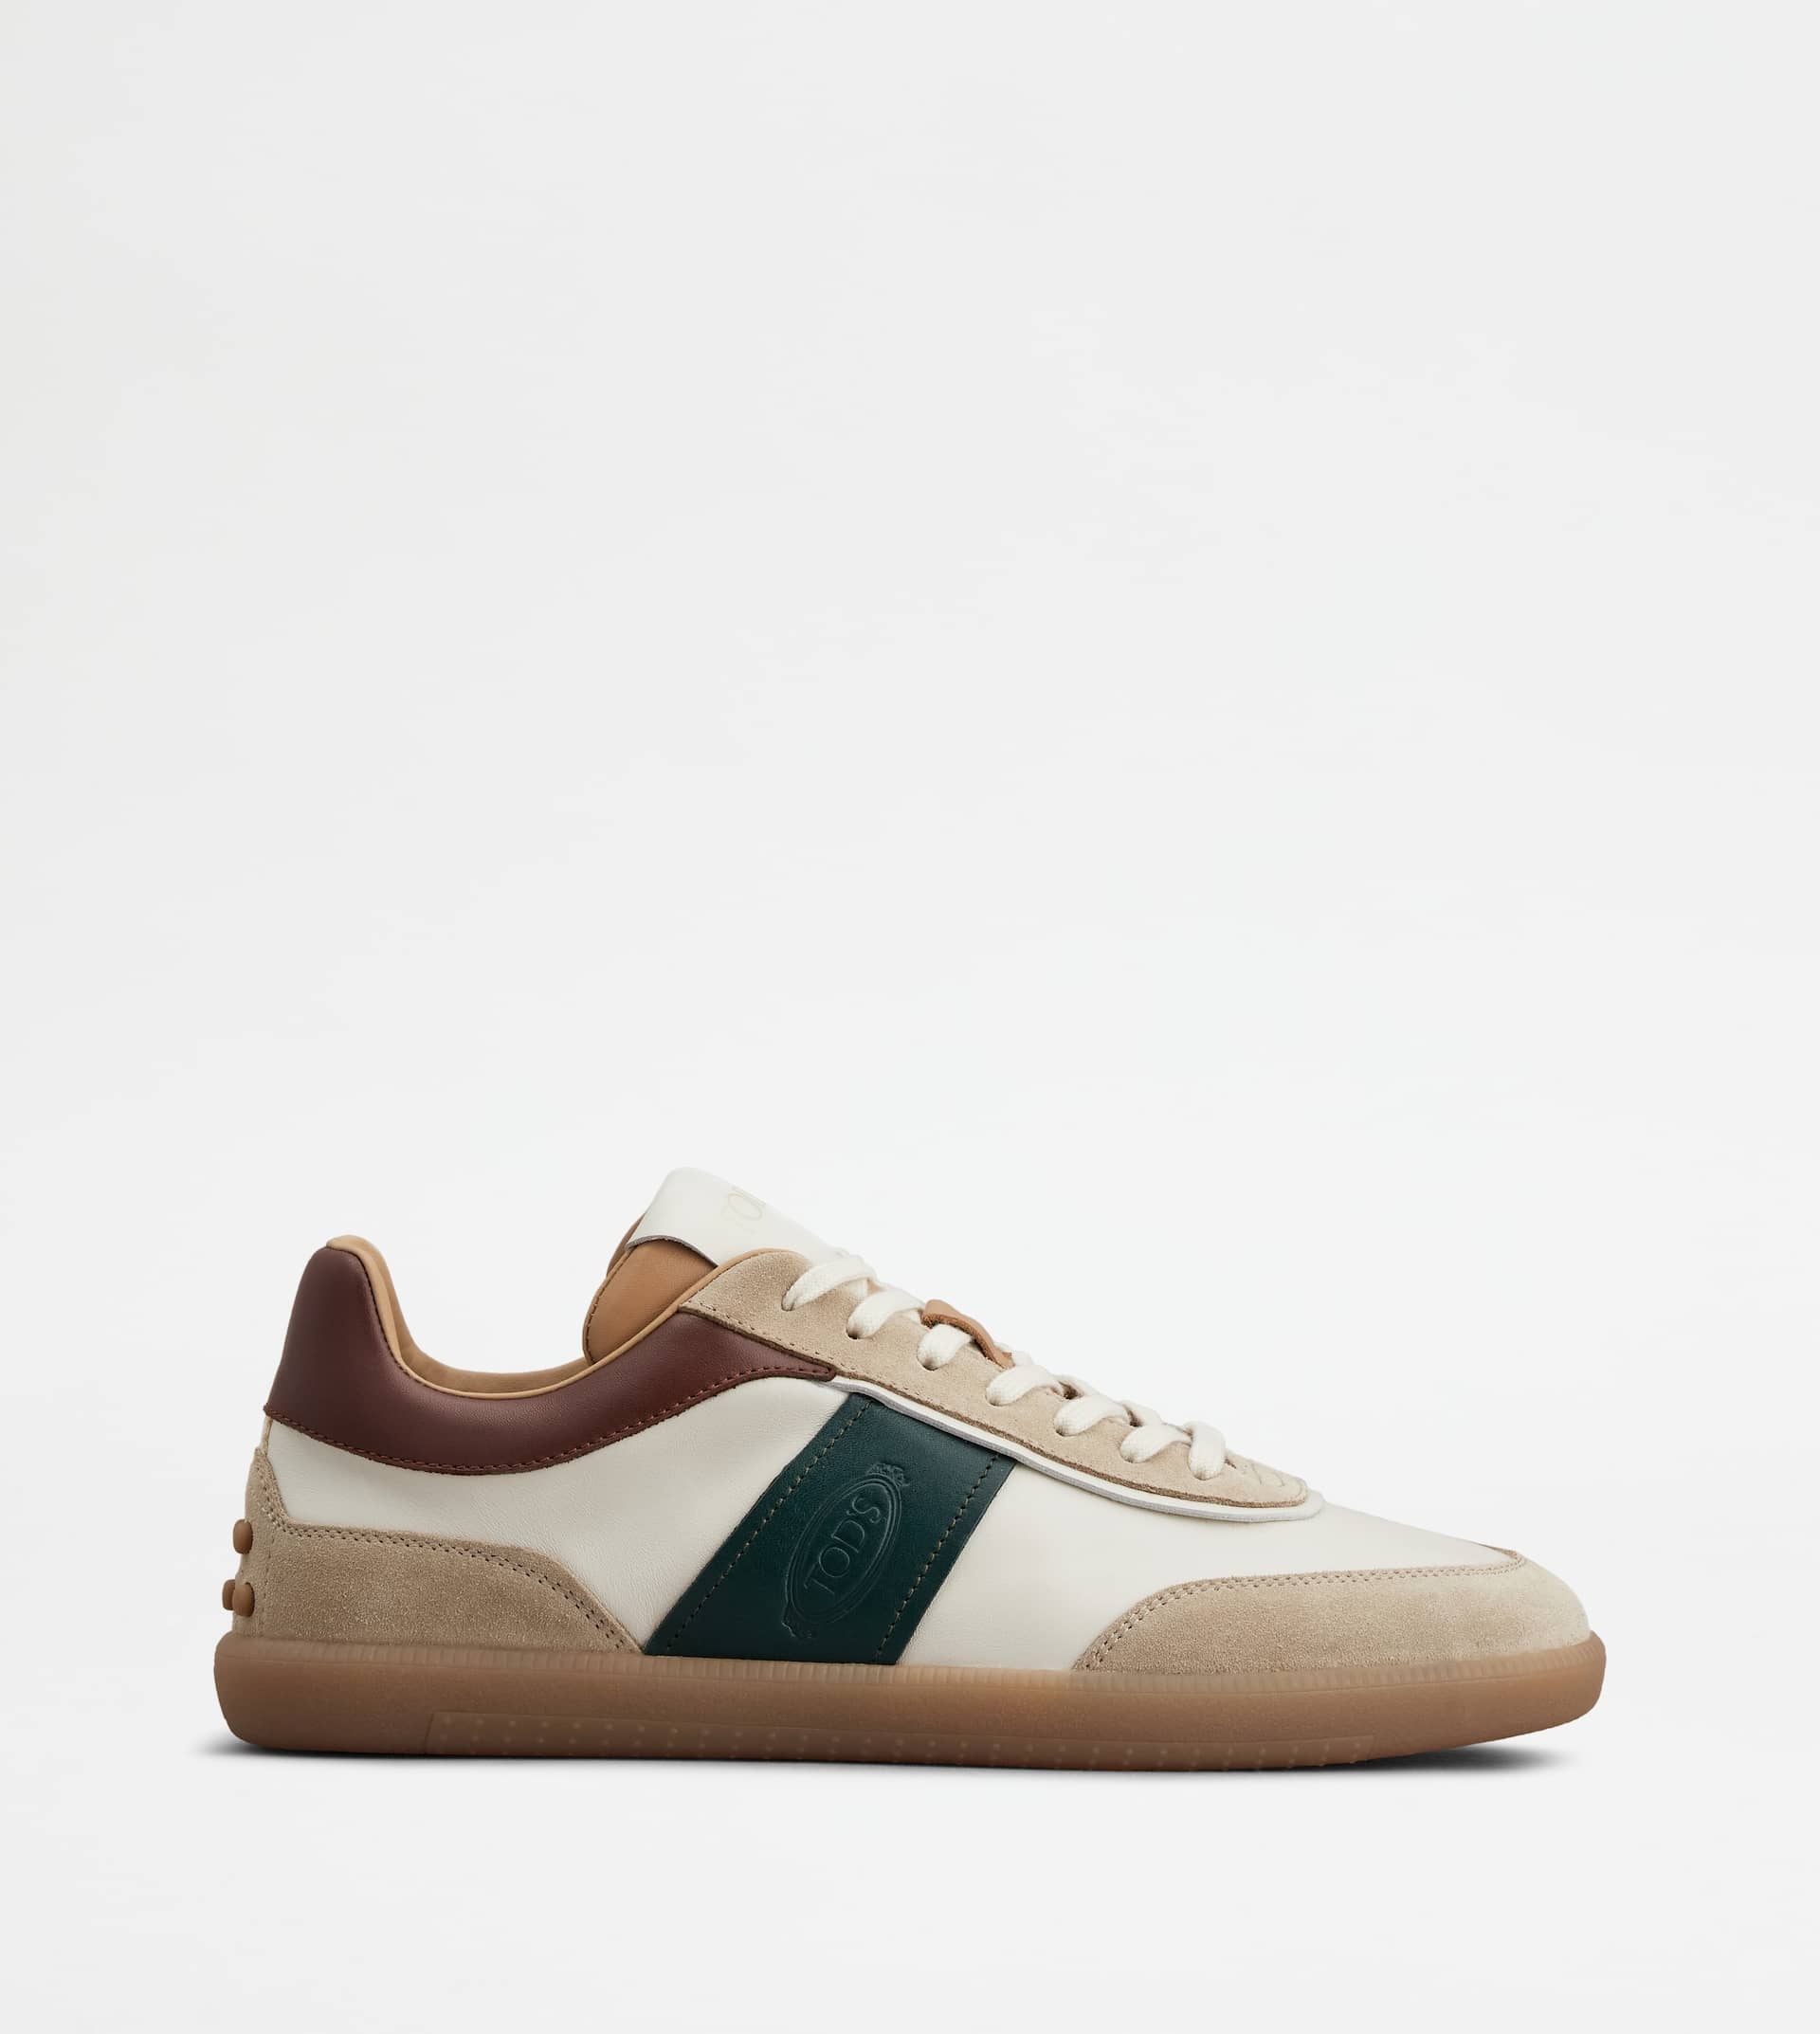 TOD'S TABS SNEAKERS IN SUEDE - OFF WHITE, BROWN, GREEN - 1